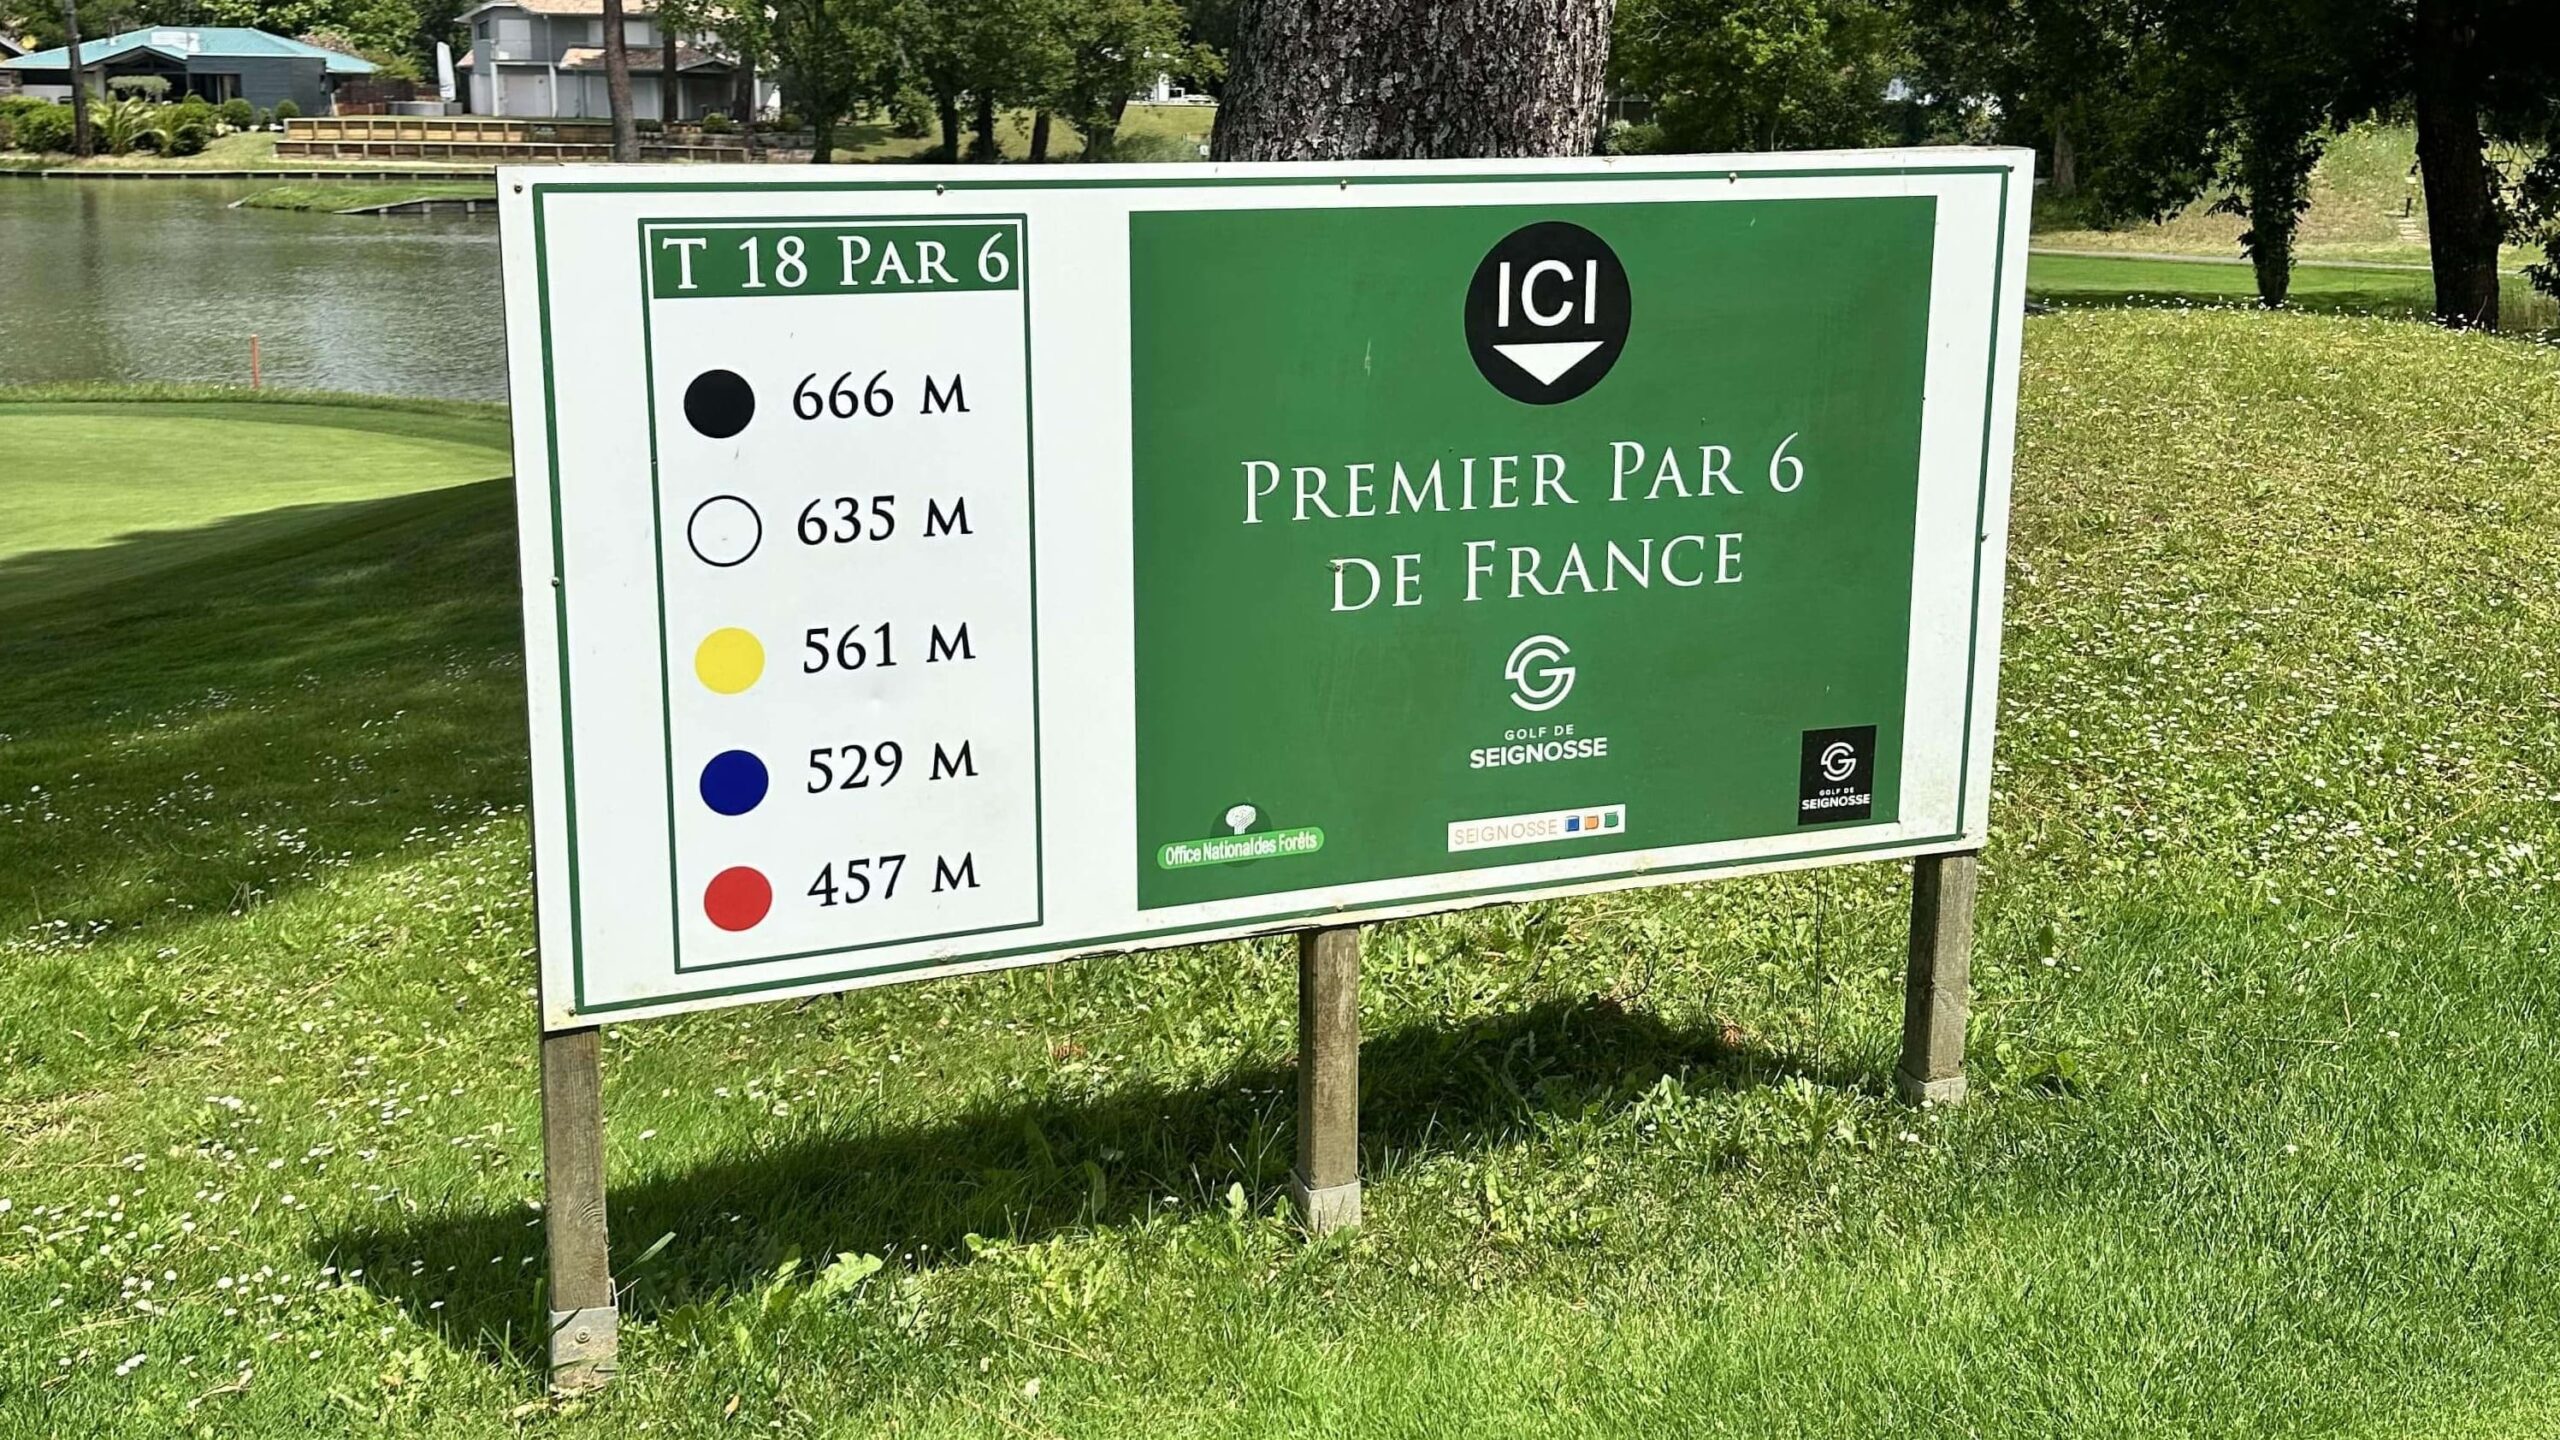 Tee box marker showing the length of the 18th hole at Golf de Seignosse